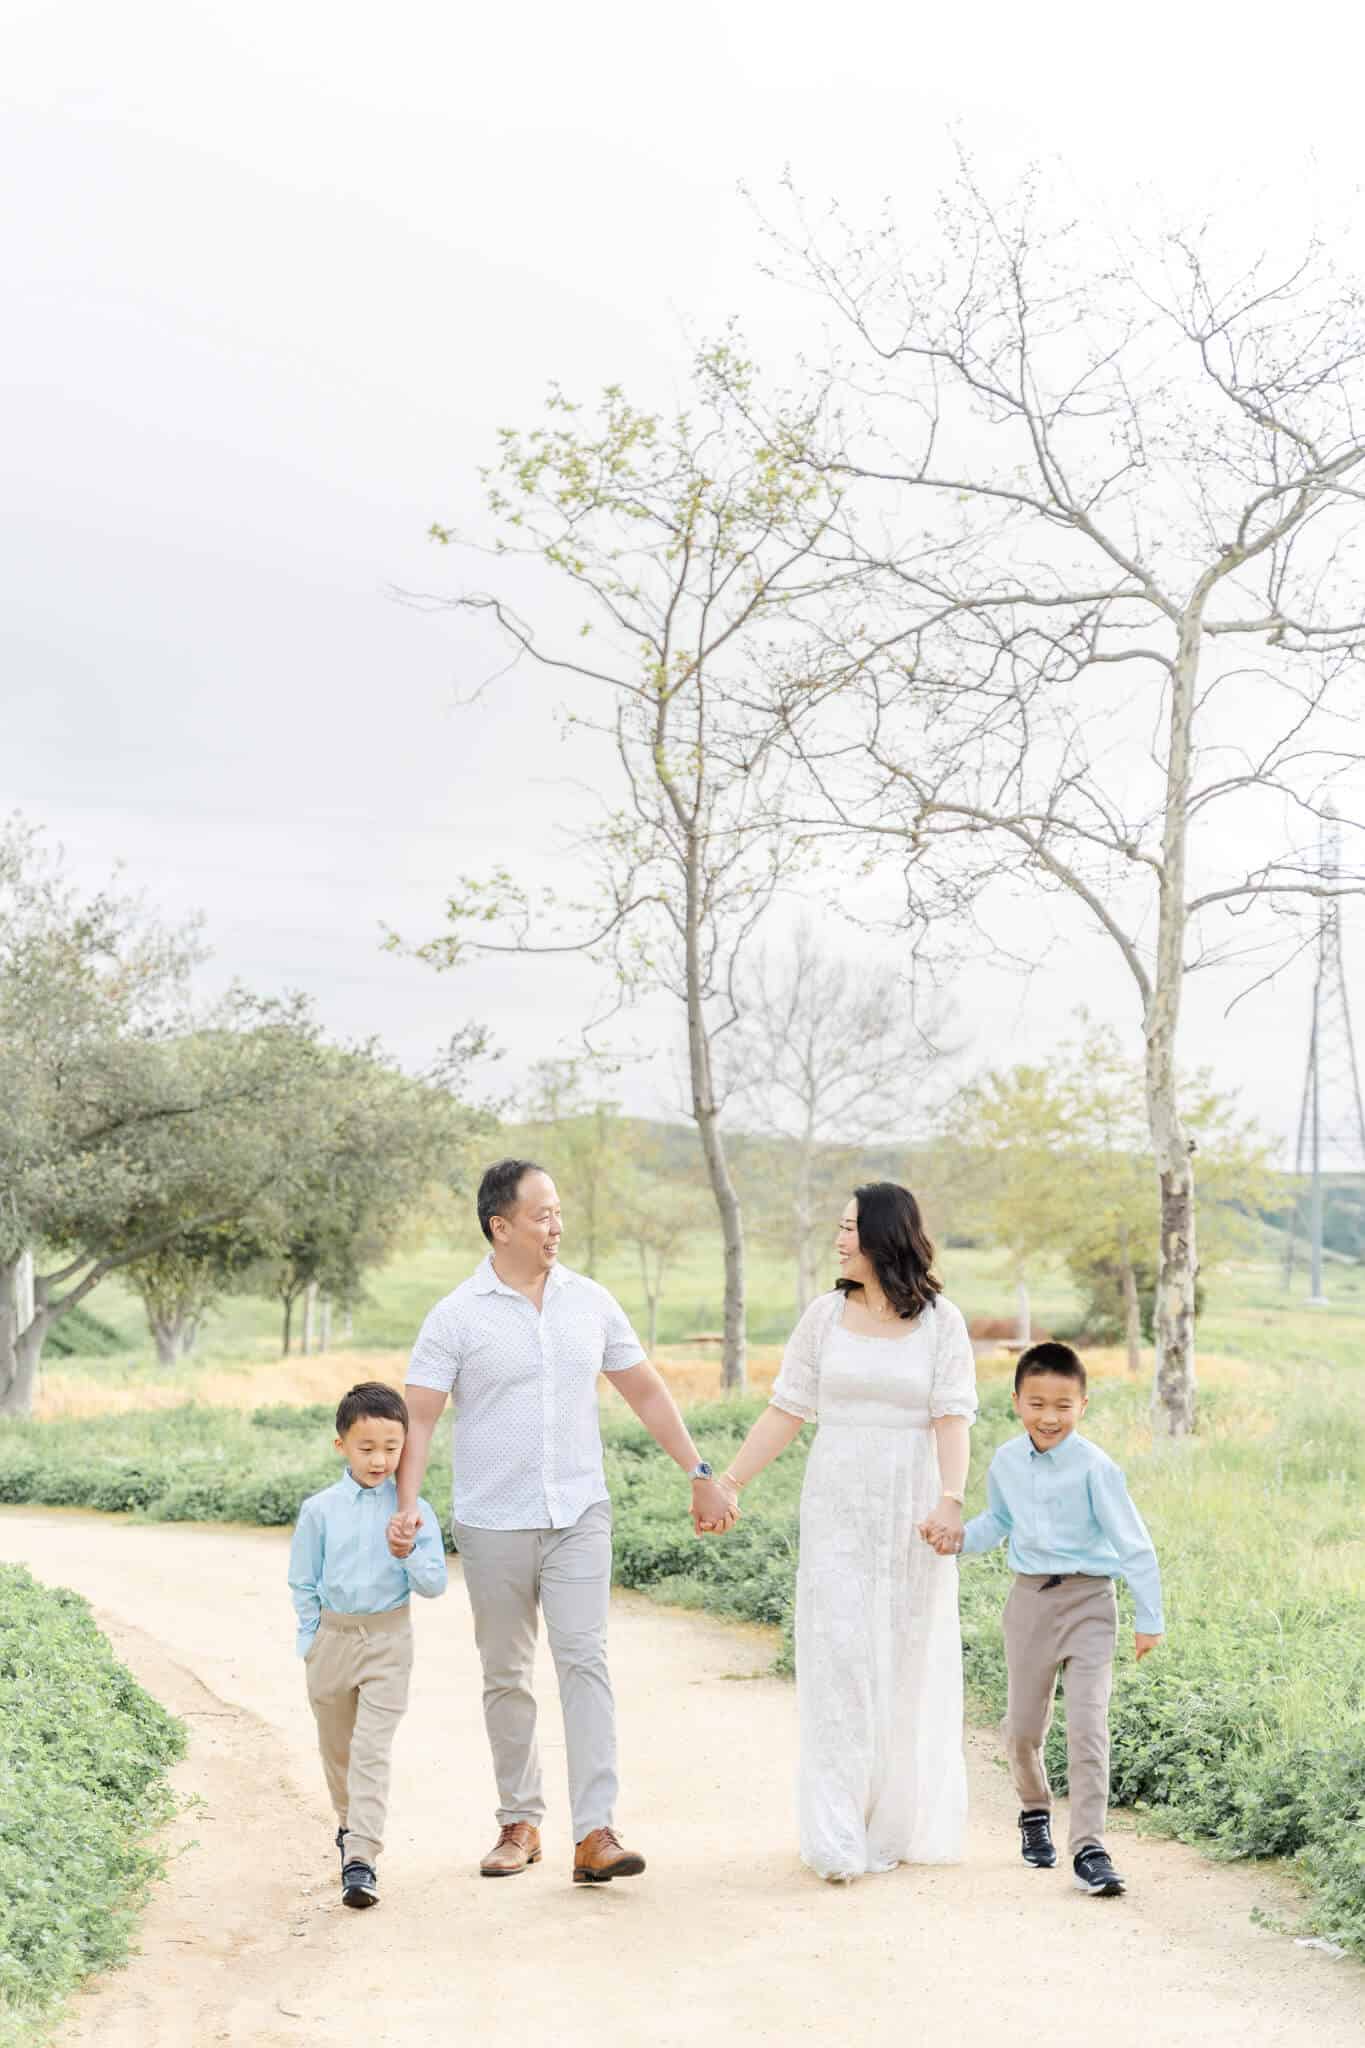 Mom and dad with two sons holding hands and walking down a dirt path in a grass field